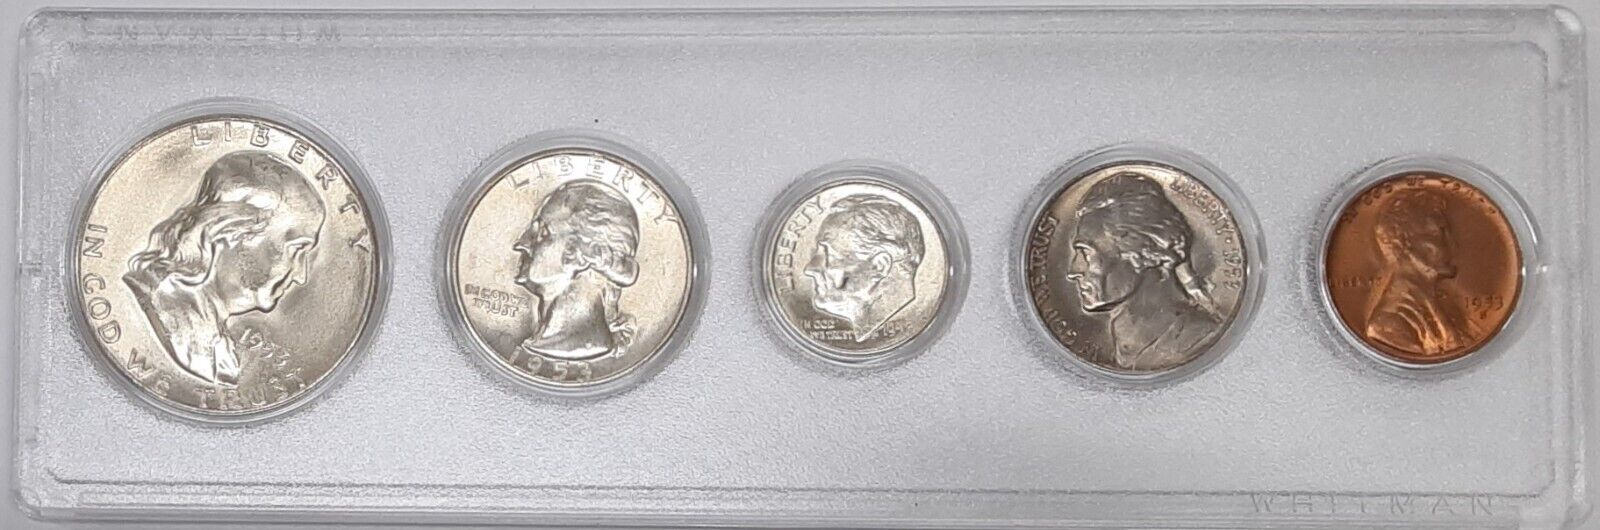 1953 P,D,S Year Set w/Silver Half, Quarter & Dime 15 Coins in Whitman Holders